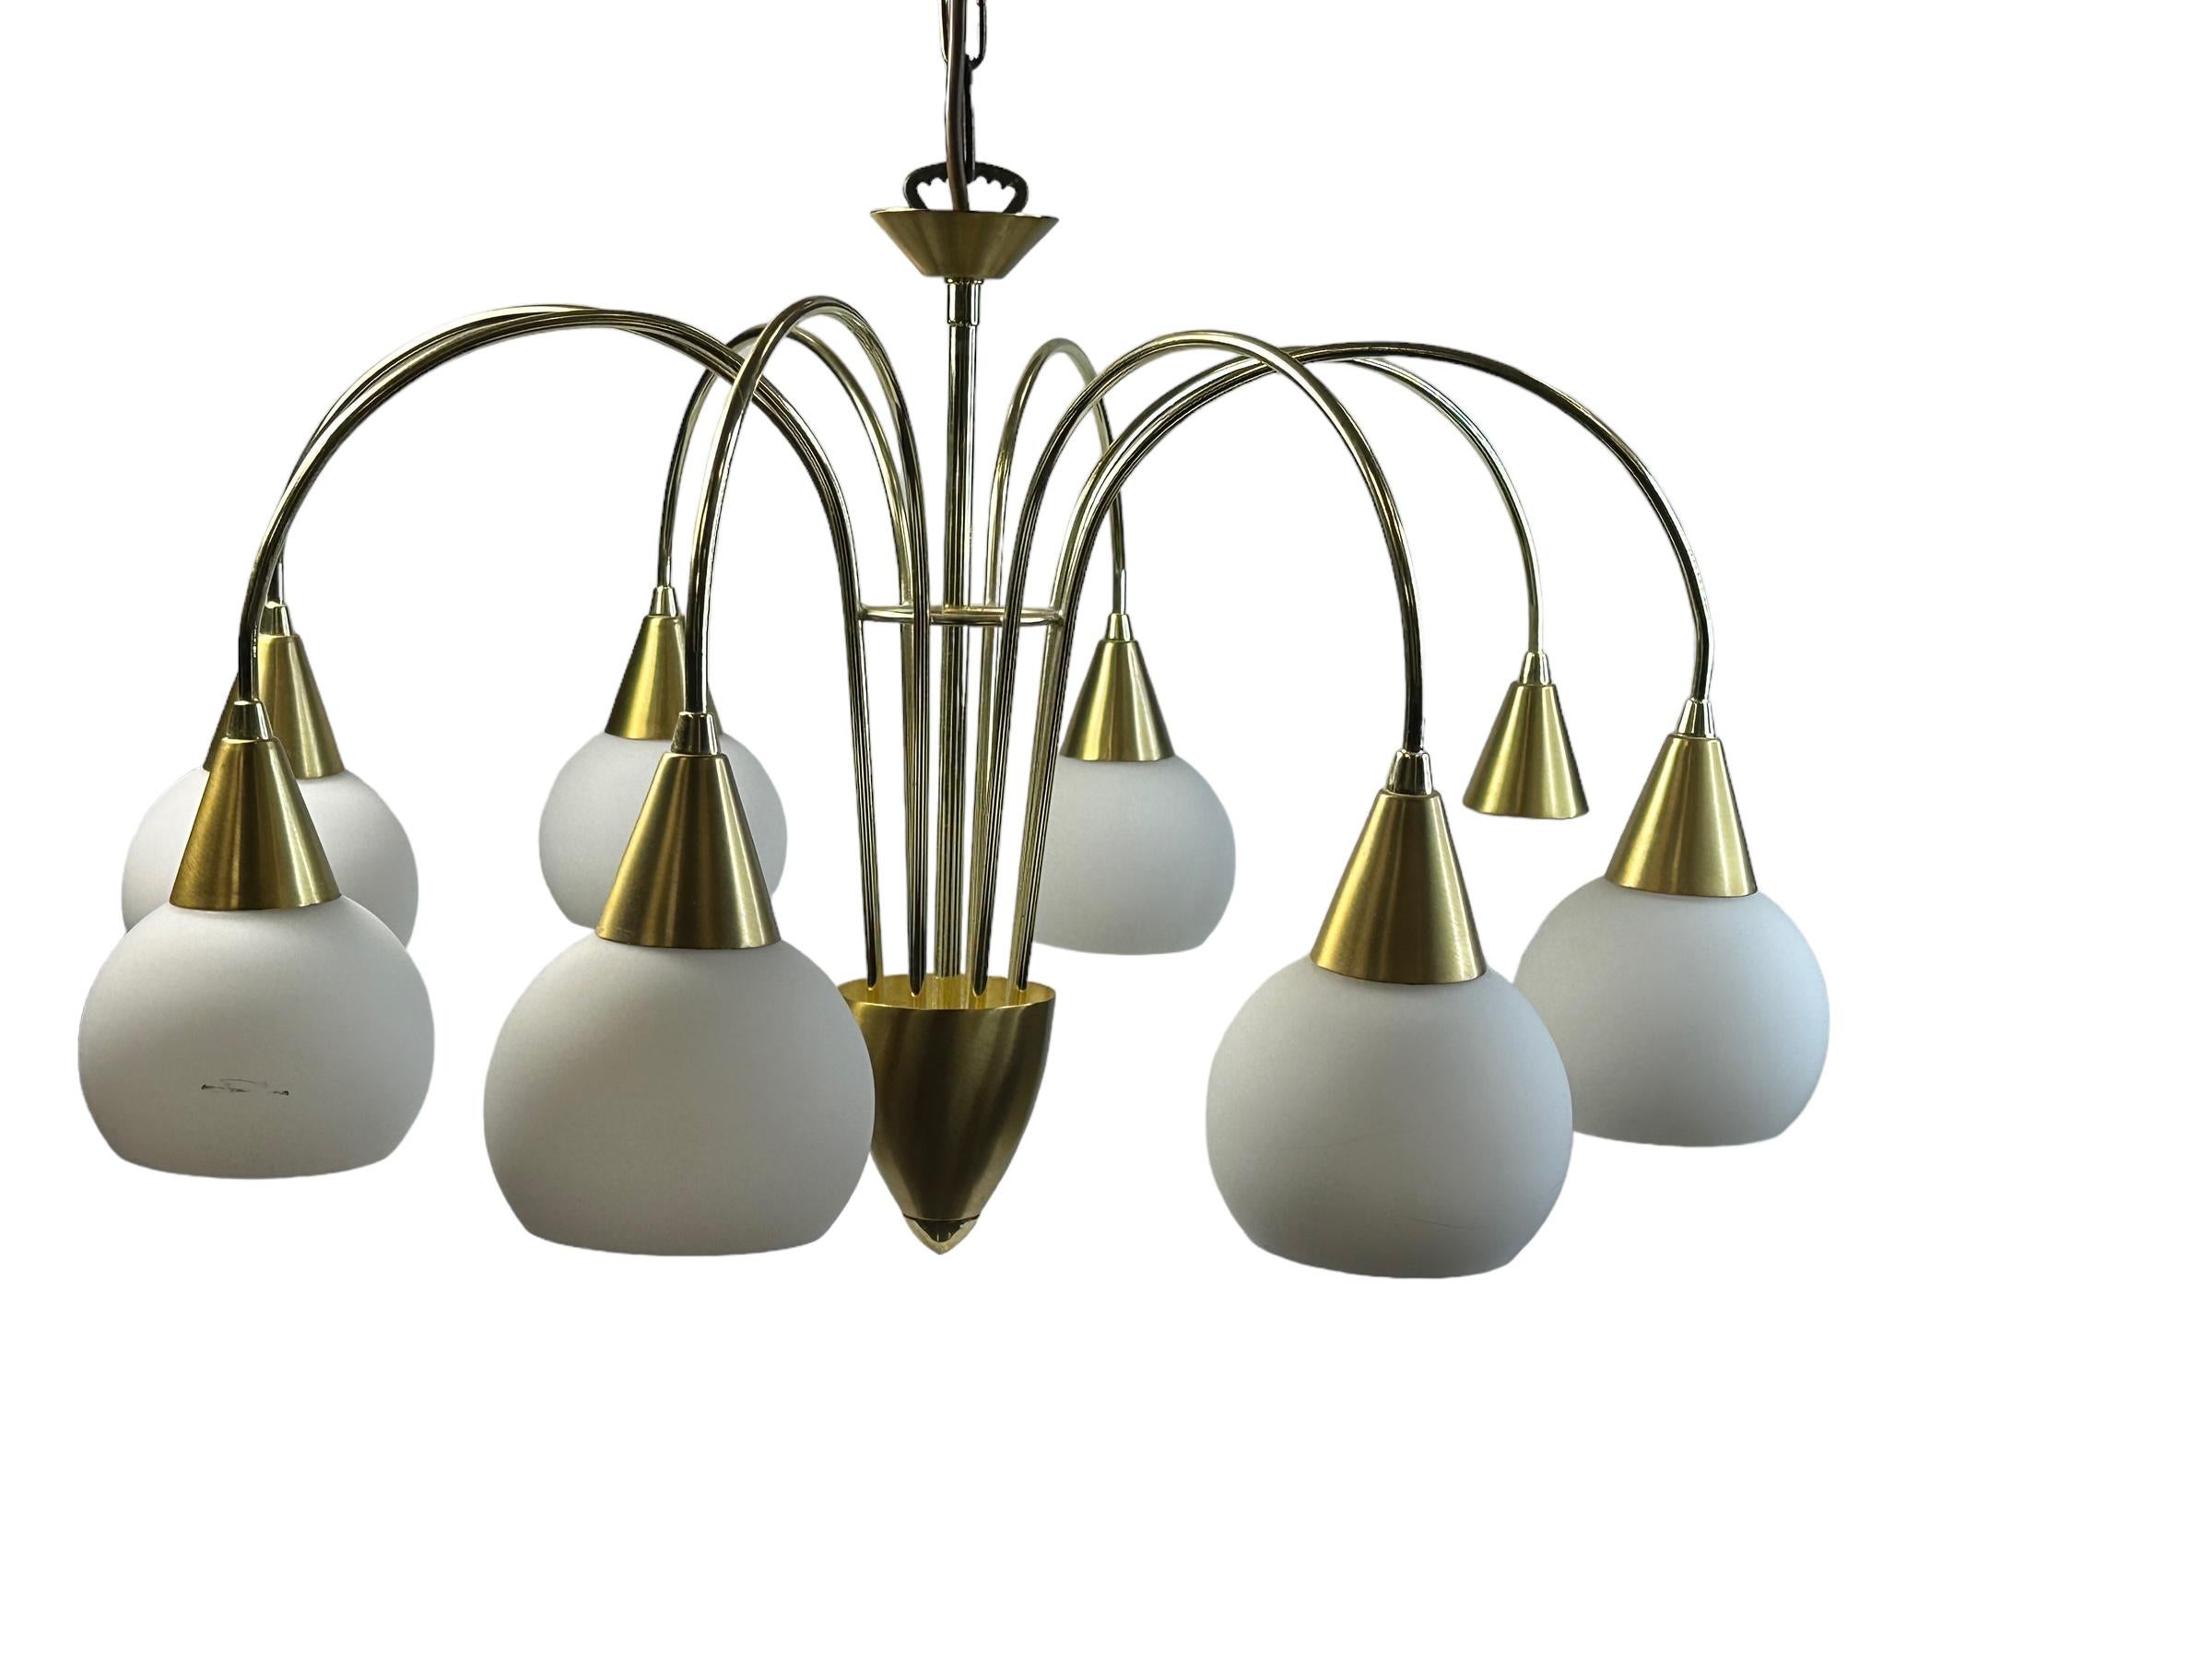 Delicate eight-light brass chandelier with glass ball shades. Works as intended with eight E14 / 110 volt light bulbs. Can hold up to 40 watts per bulb. Beautiful brushed metal chandelier with white glass shades. It provides a very warm light and